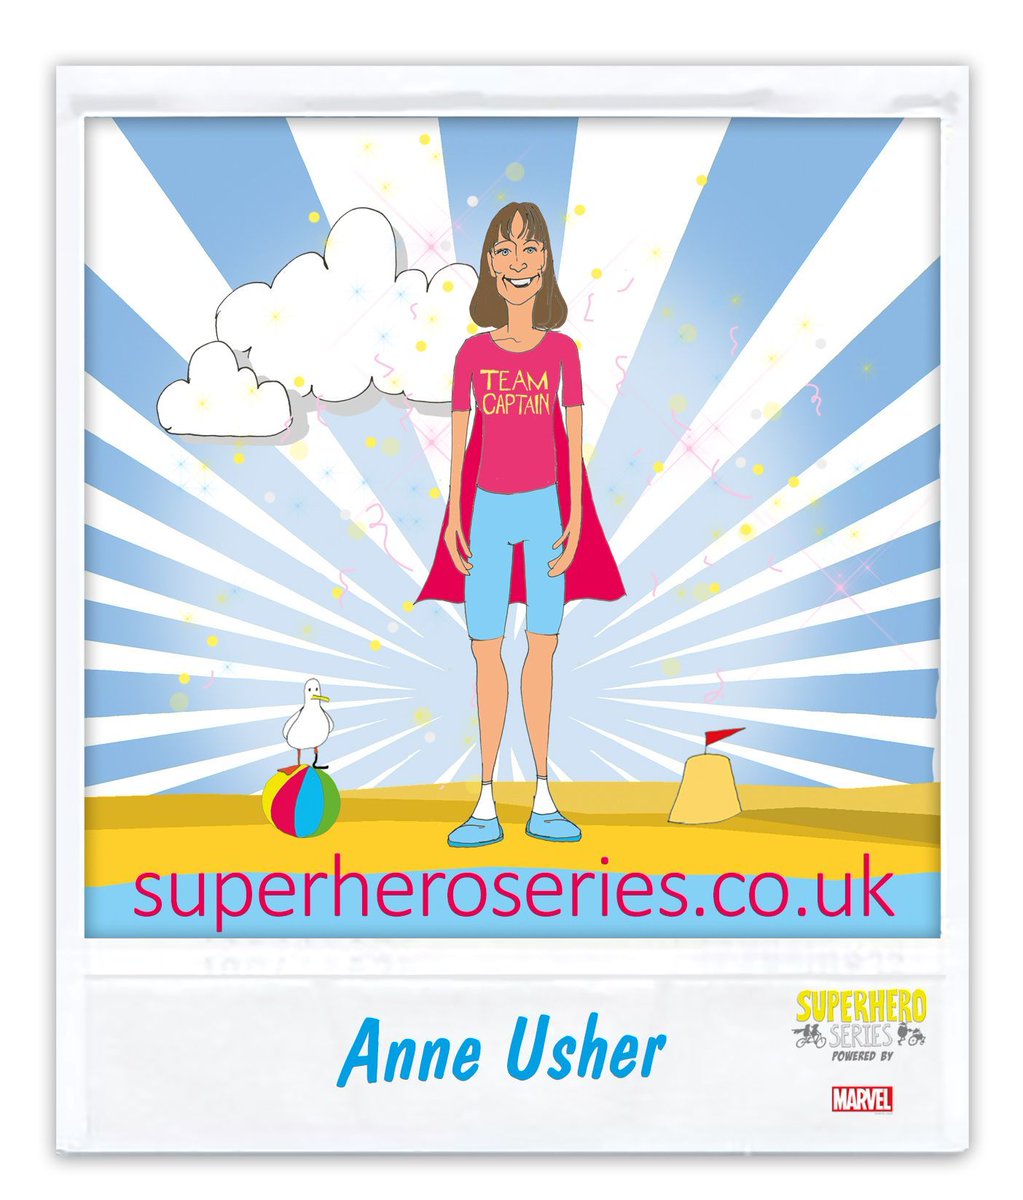 POW!! SUPER TEAM CAPTAIN @anne200solo is looking for teammates with strong Superhero spirit to join them at Superhero Tri! Share your SUPER story to enter our Celebrity Competition! #findyourpower superheroseries.co.uk